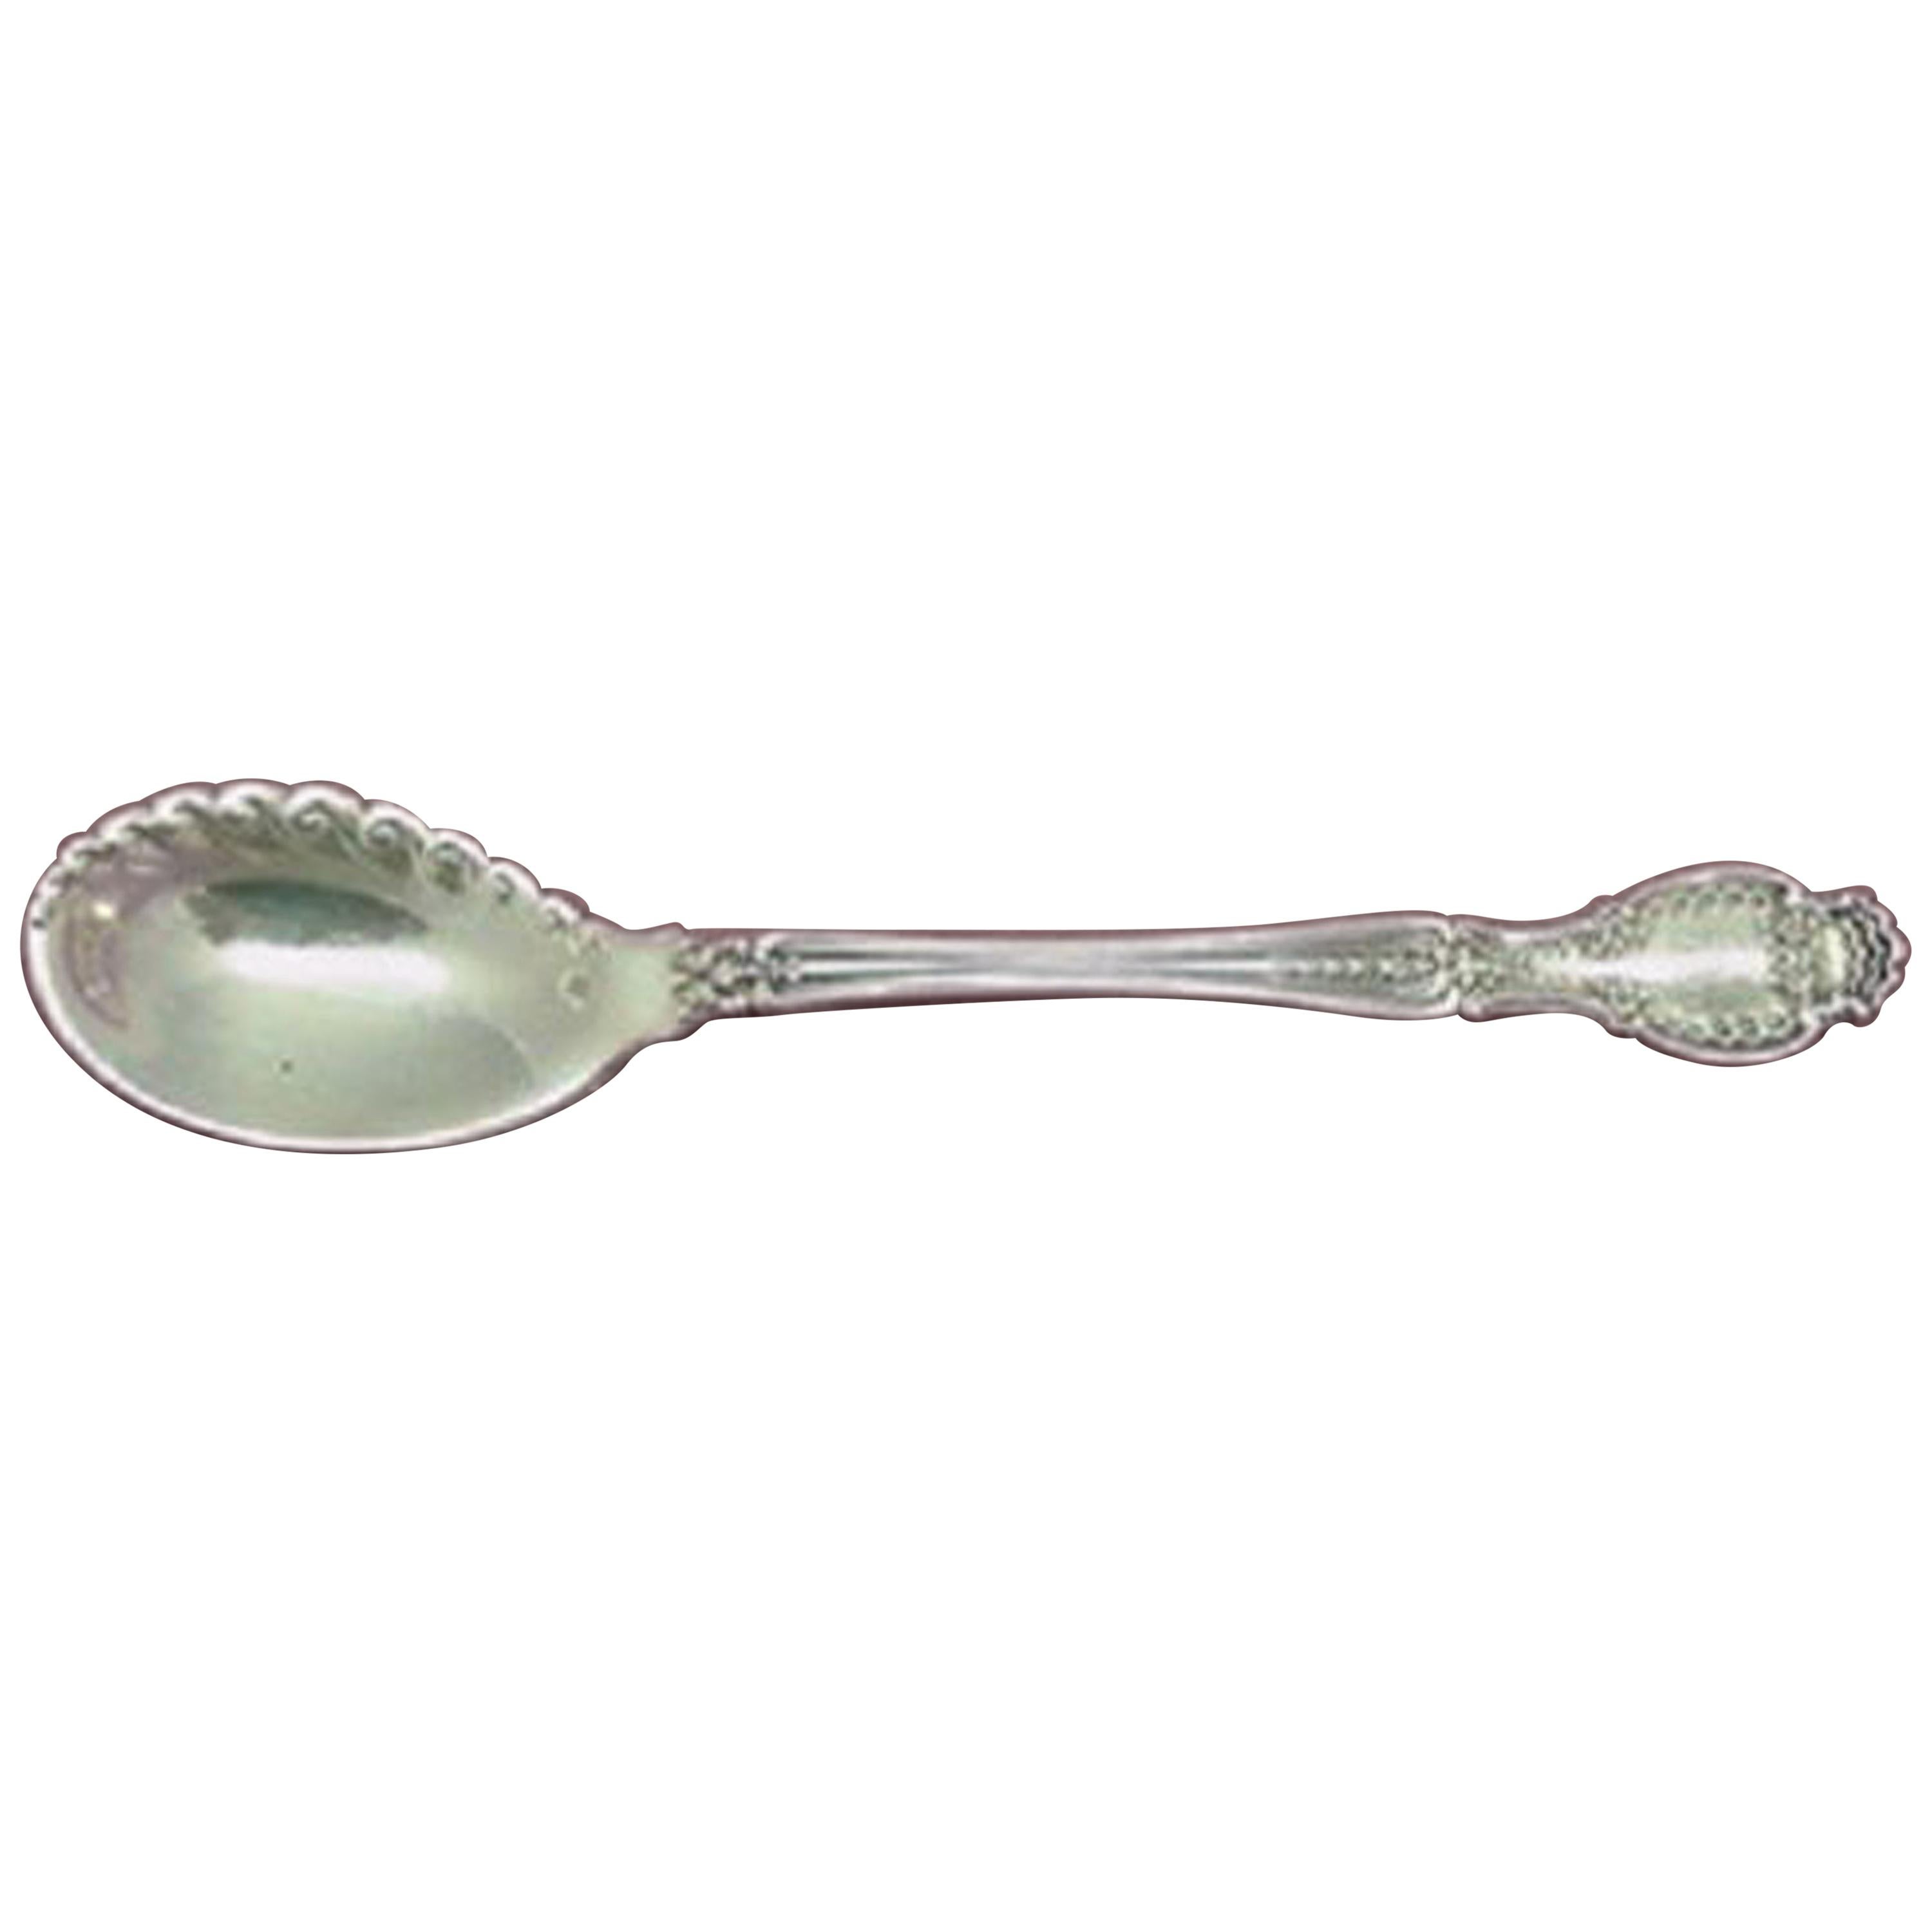 Richelieu by Tiffany and Co. Sterling Silver Sorbet Spoon Ruffled Edge